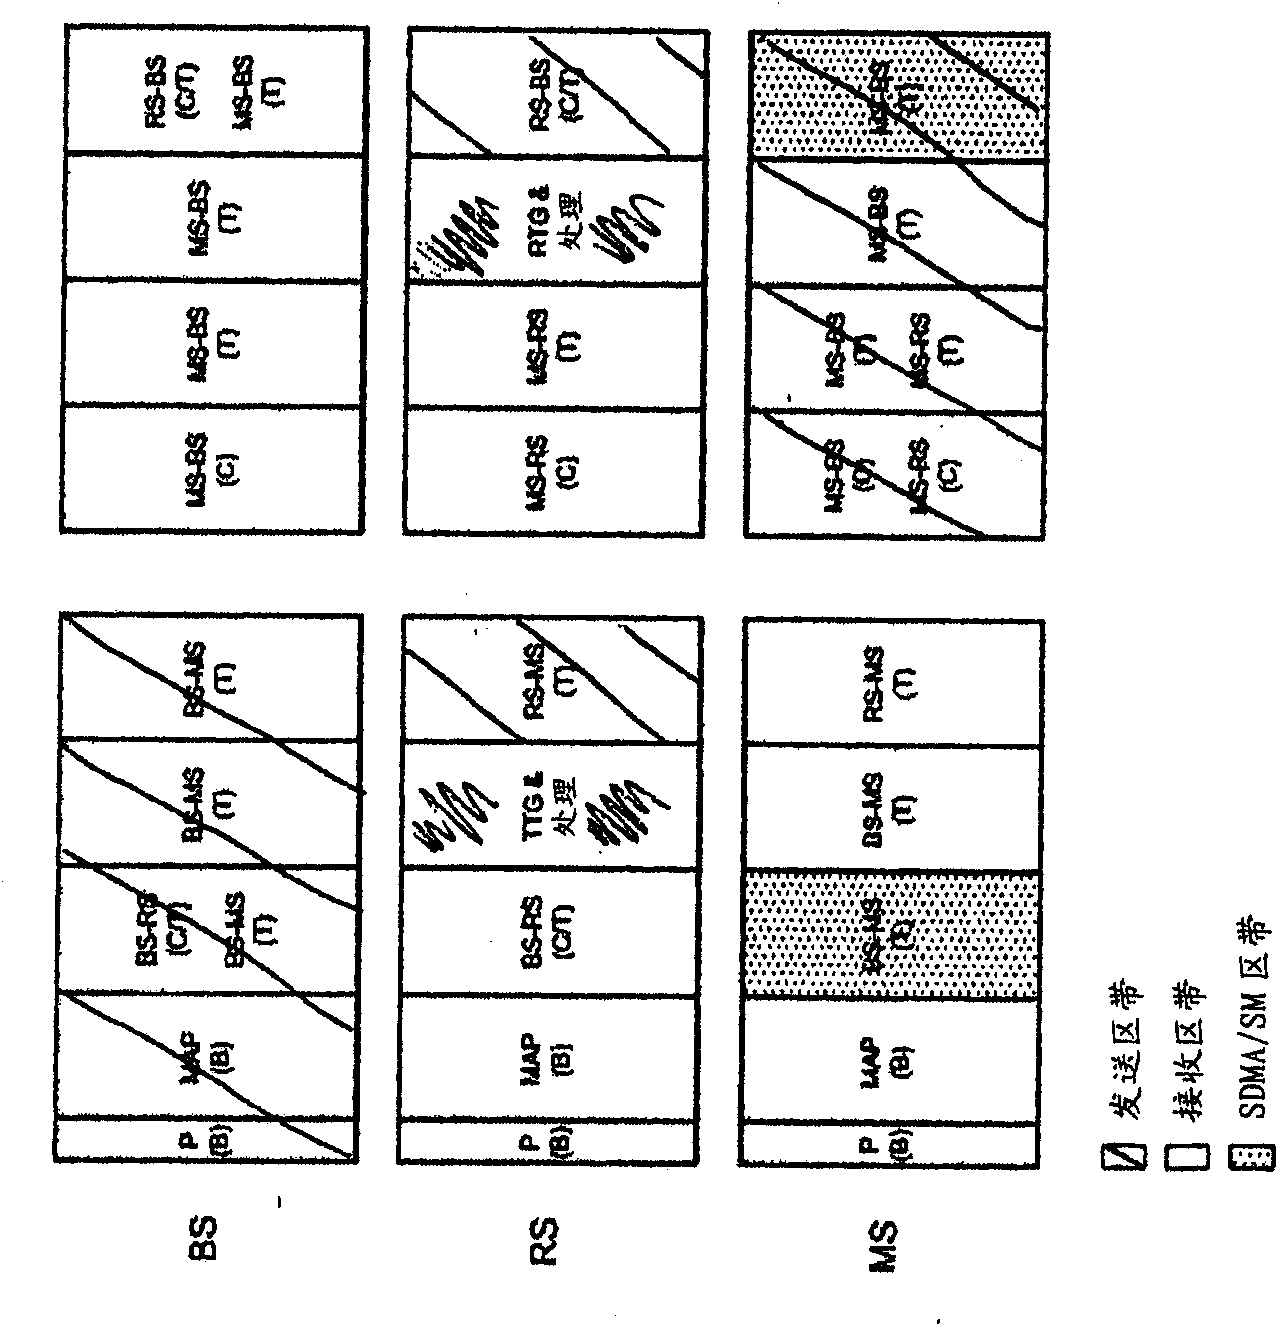 Multi-hop wireless communication system and method